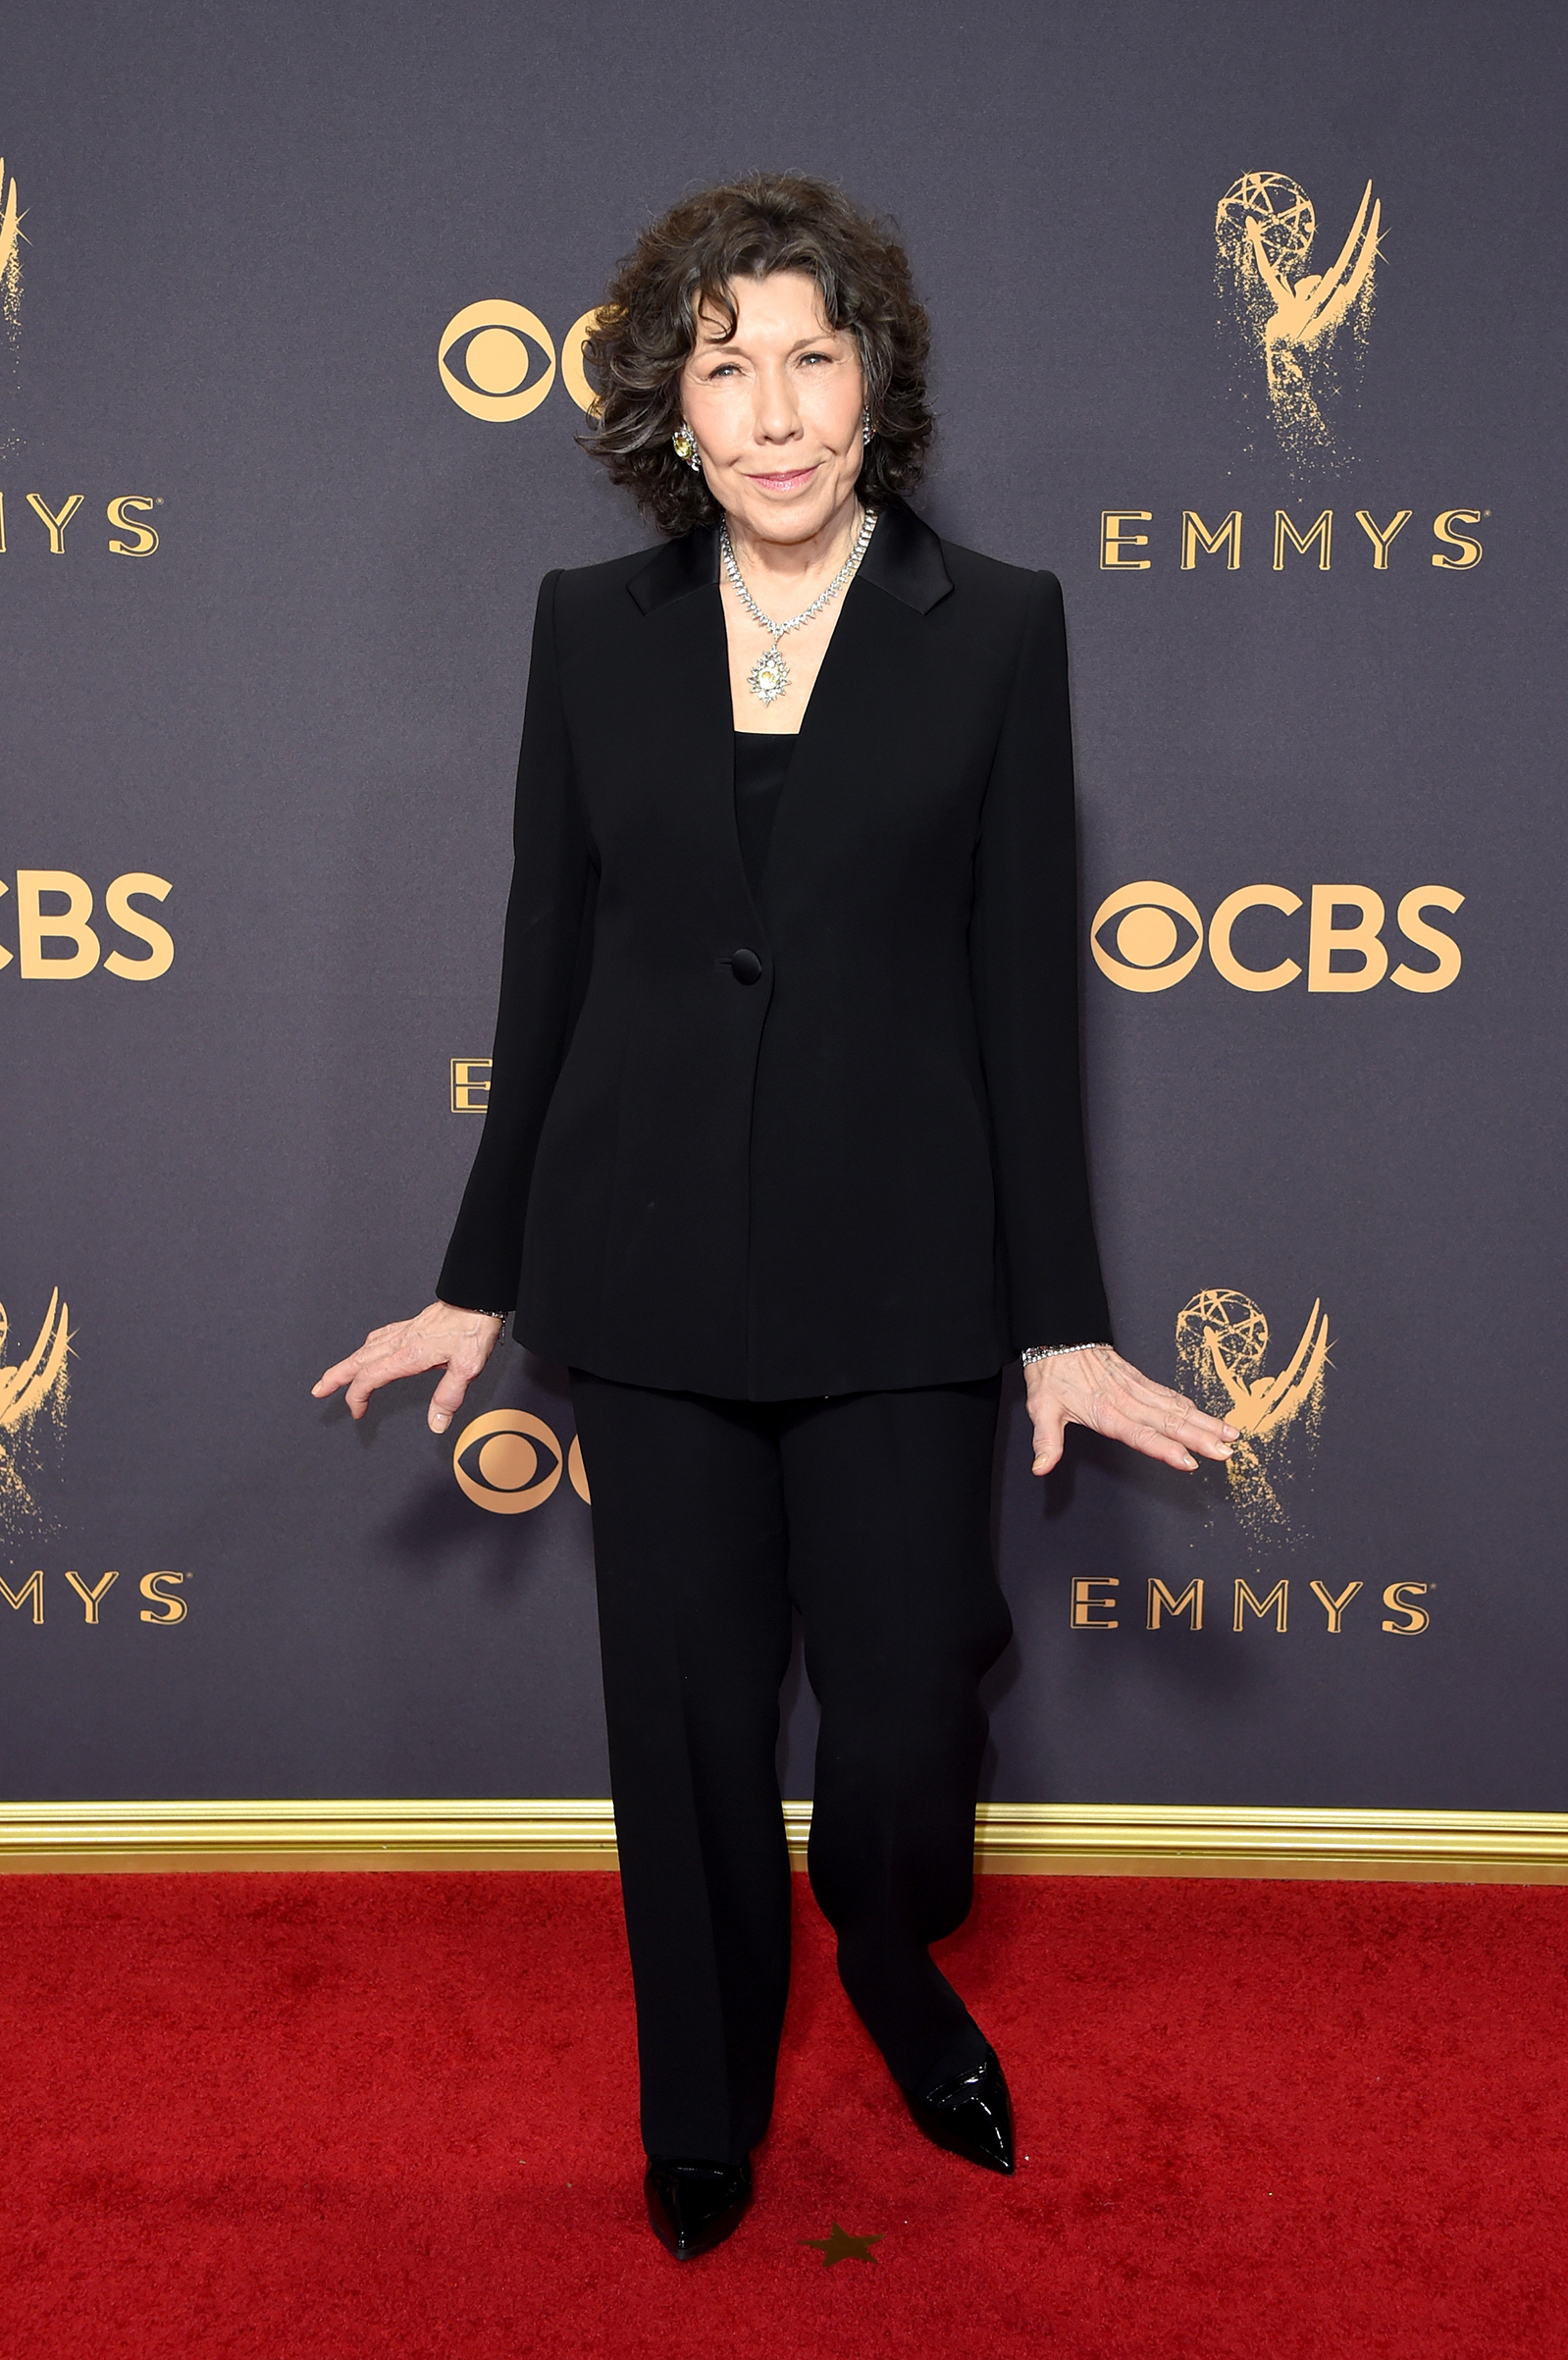 Actor Lily Tomlin attends the 69th Annual Primetime Emmy Awards at Microsoft Theater on September 17, 2017 in Los Angeles, California.